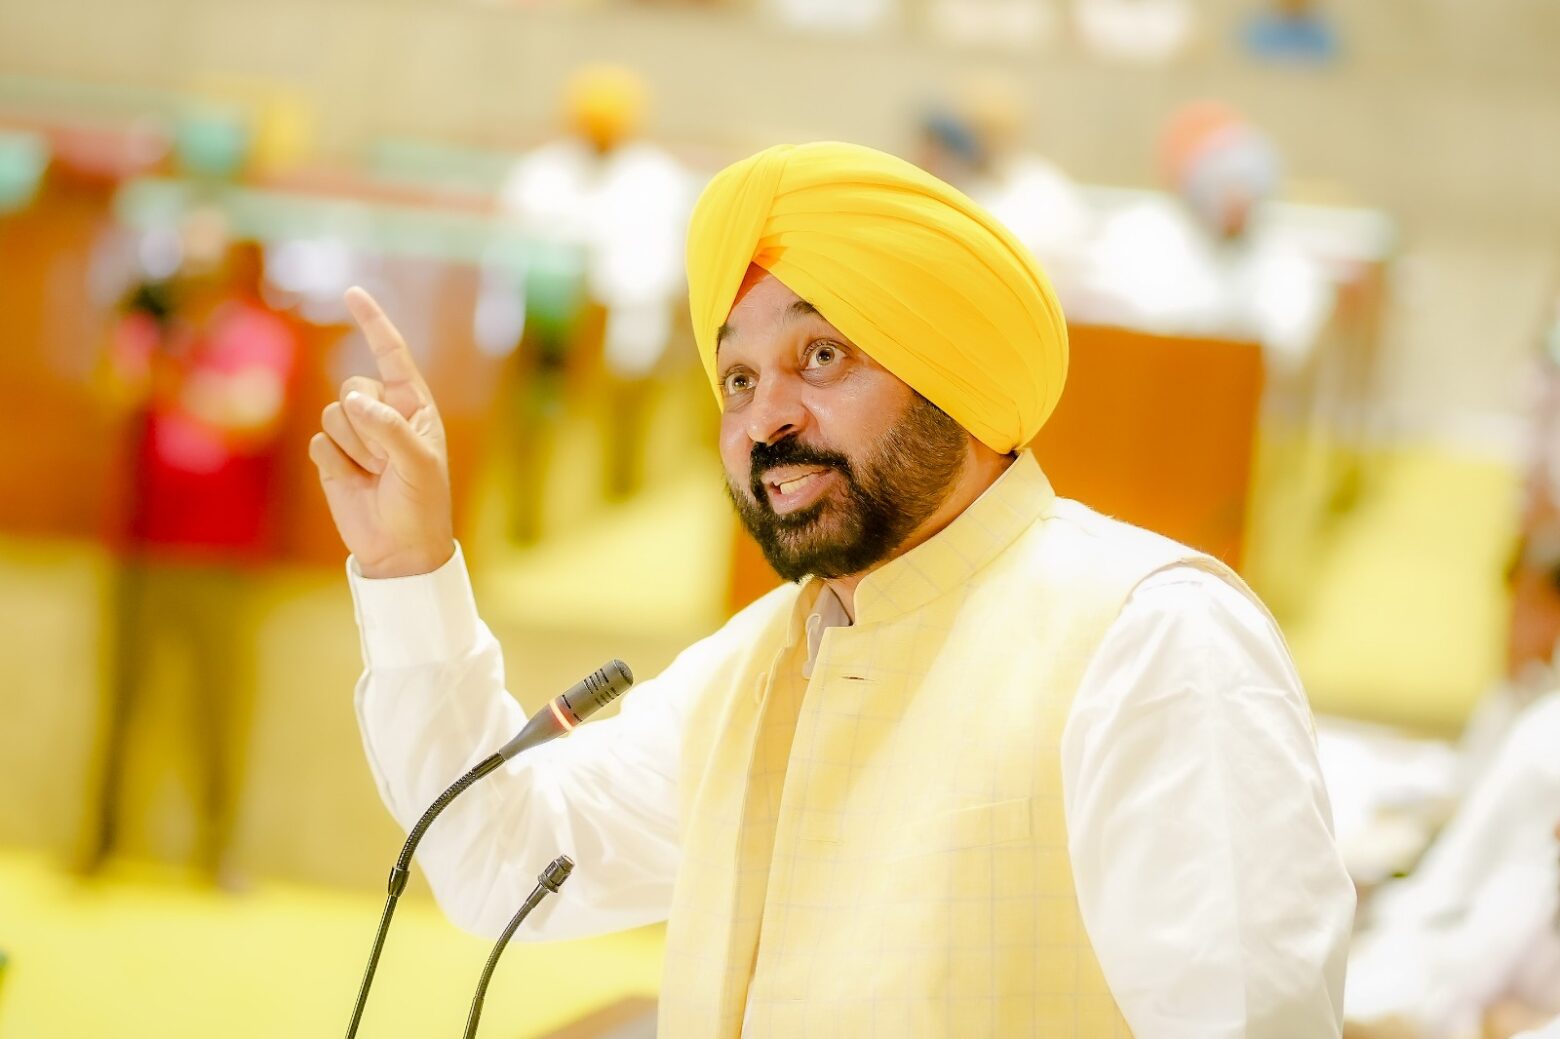 Punjab has its own rich culture, traditions and heritage which need to be perpetuated amongst the younger generations